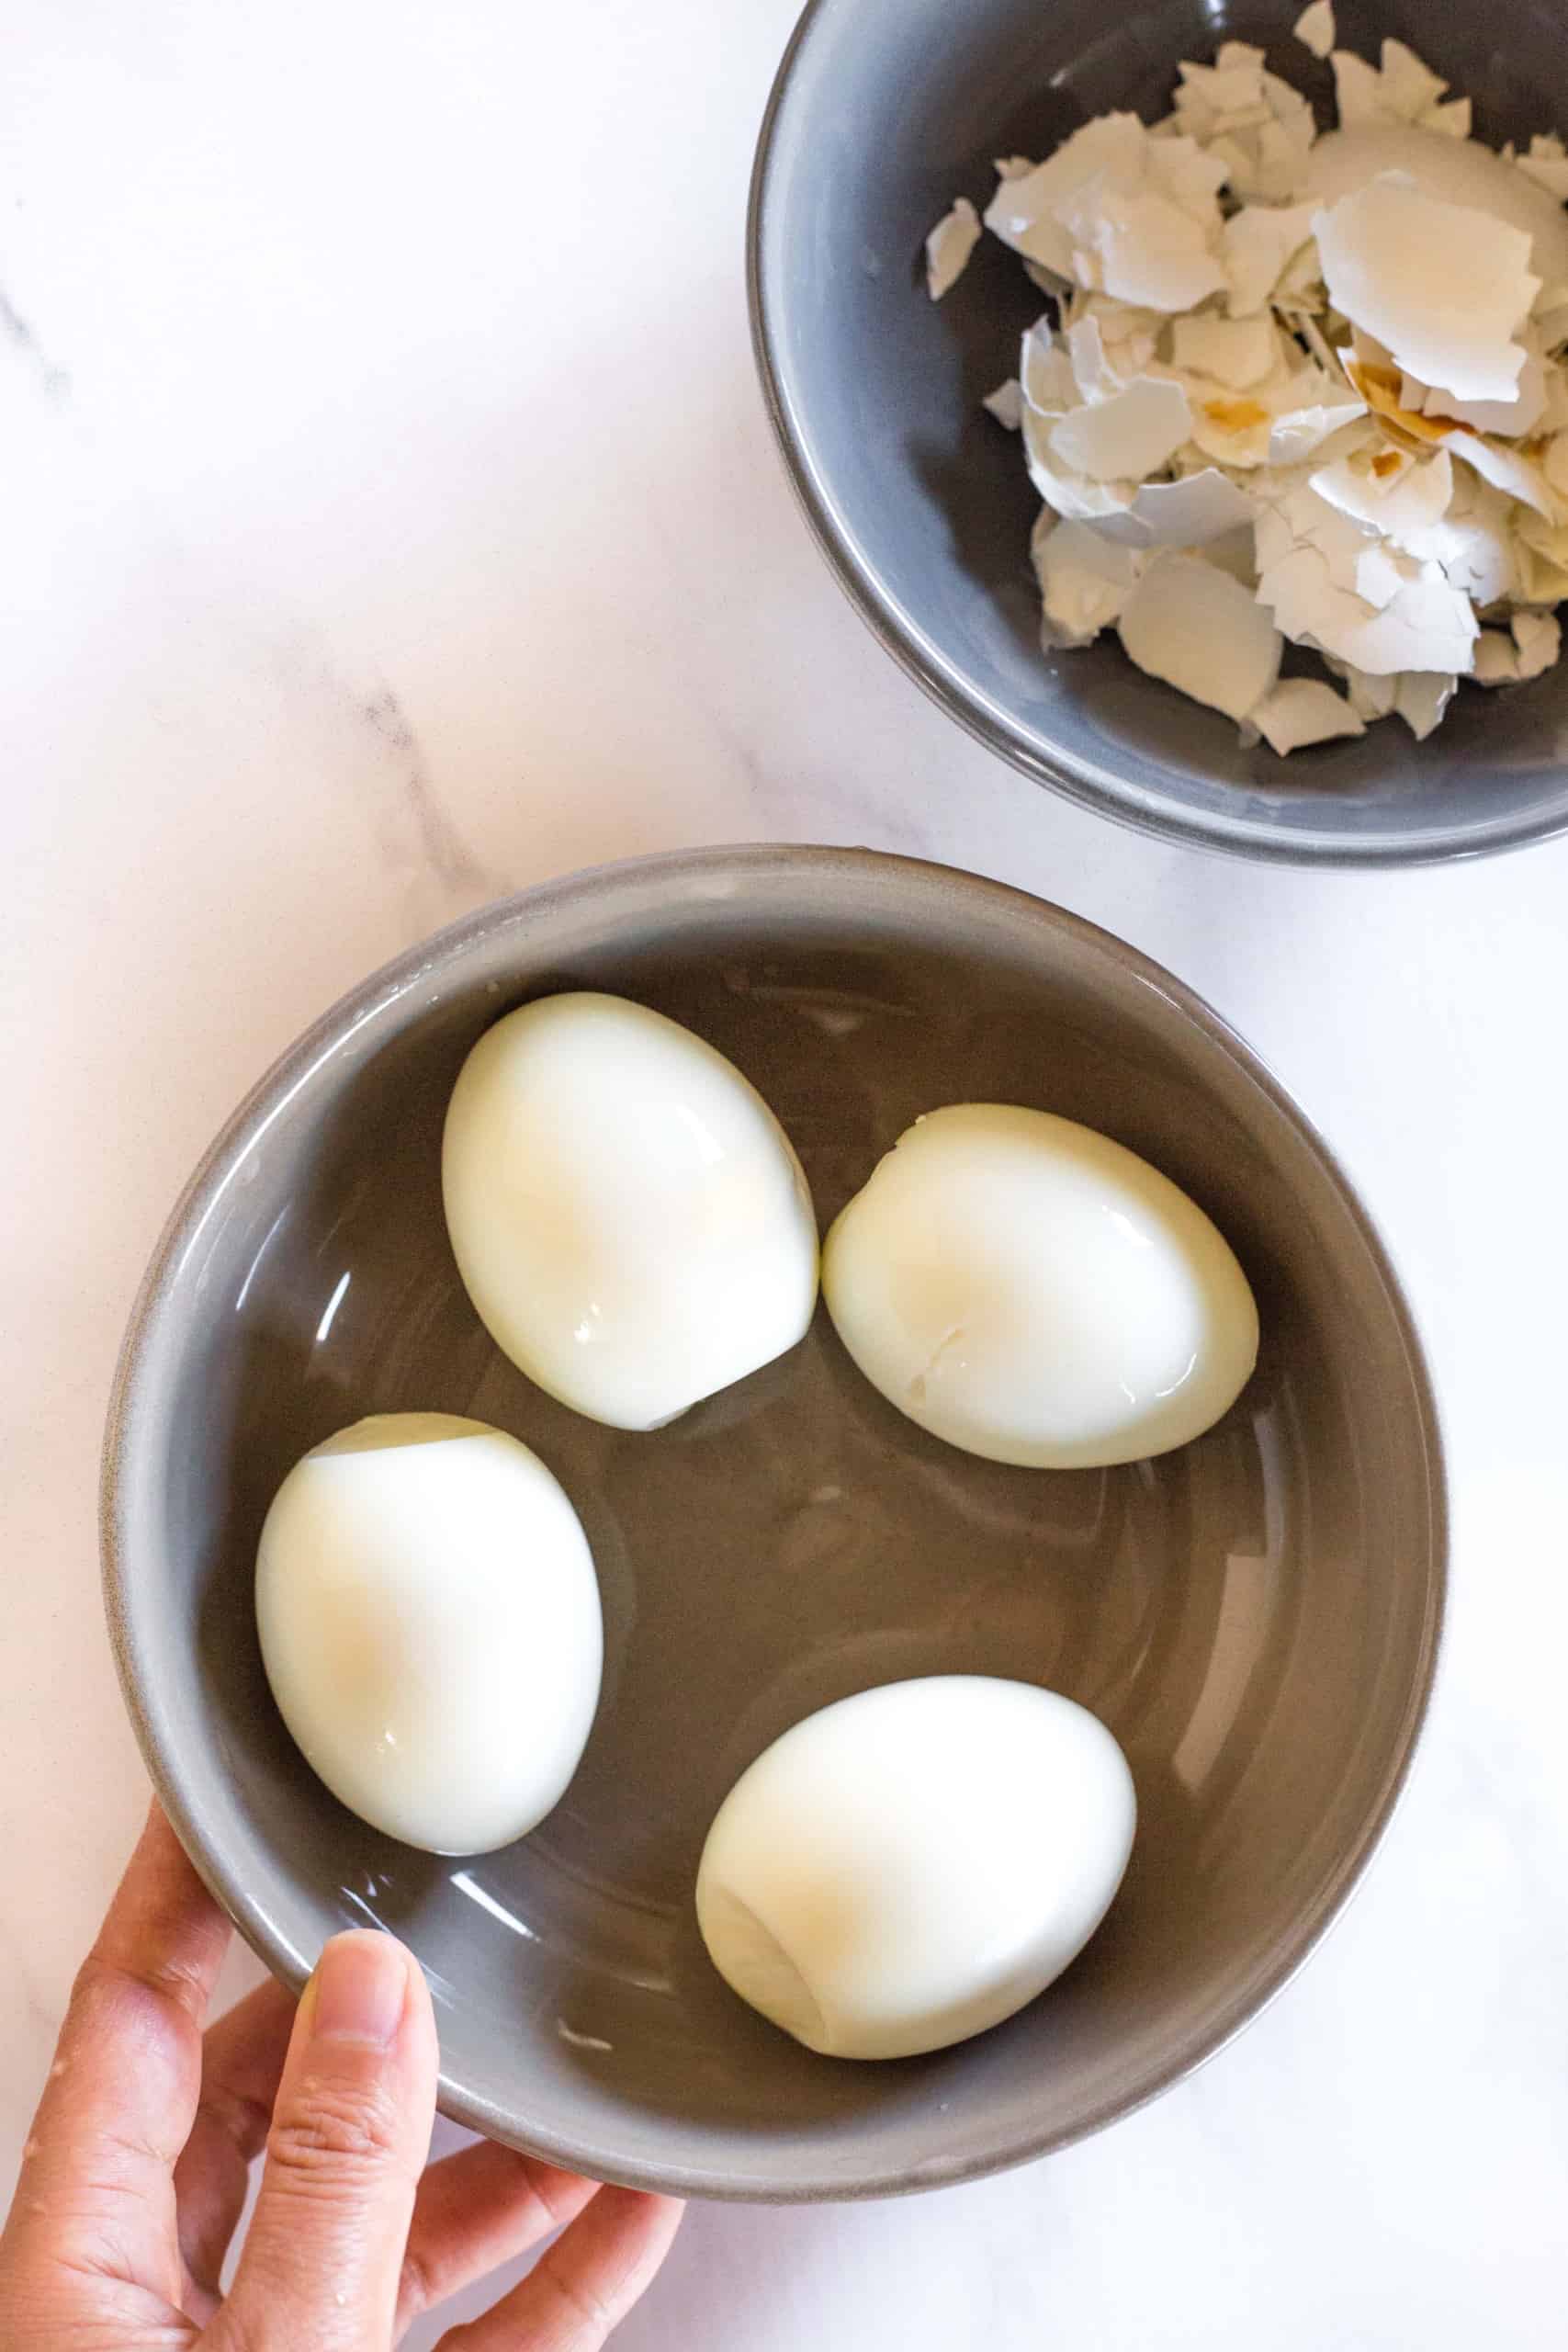 Peeled hard-boiled eggs in a bowl with their shells in another bowl.